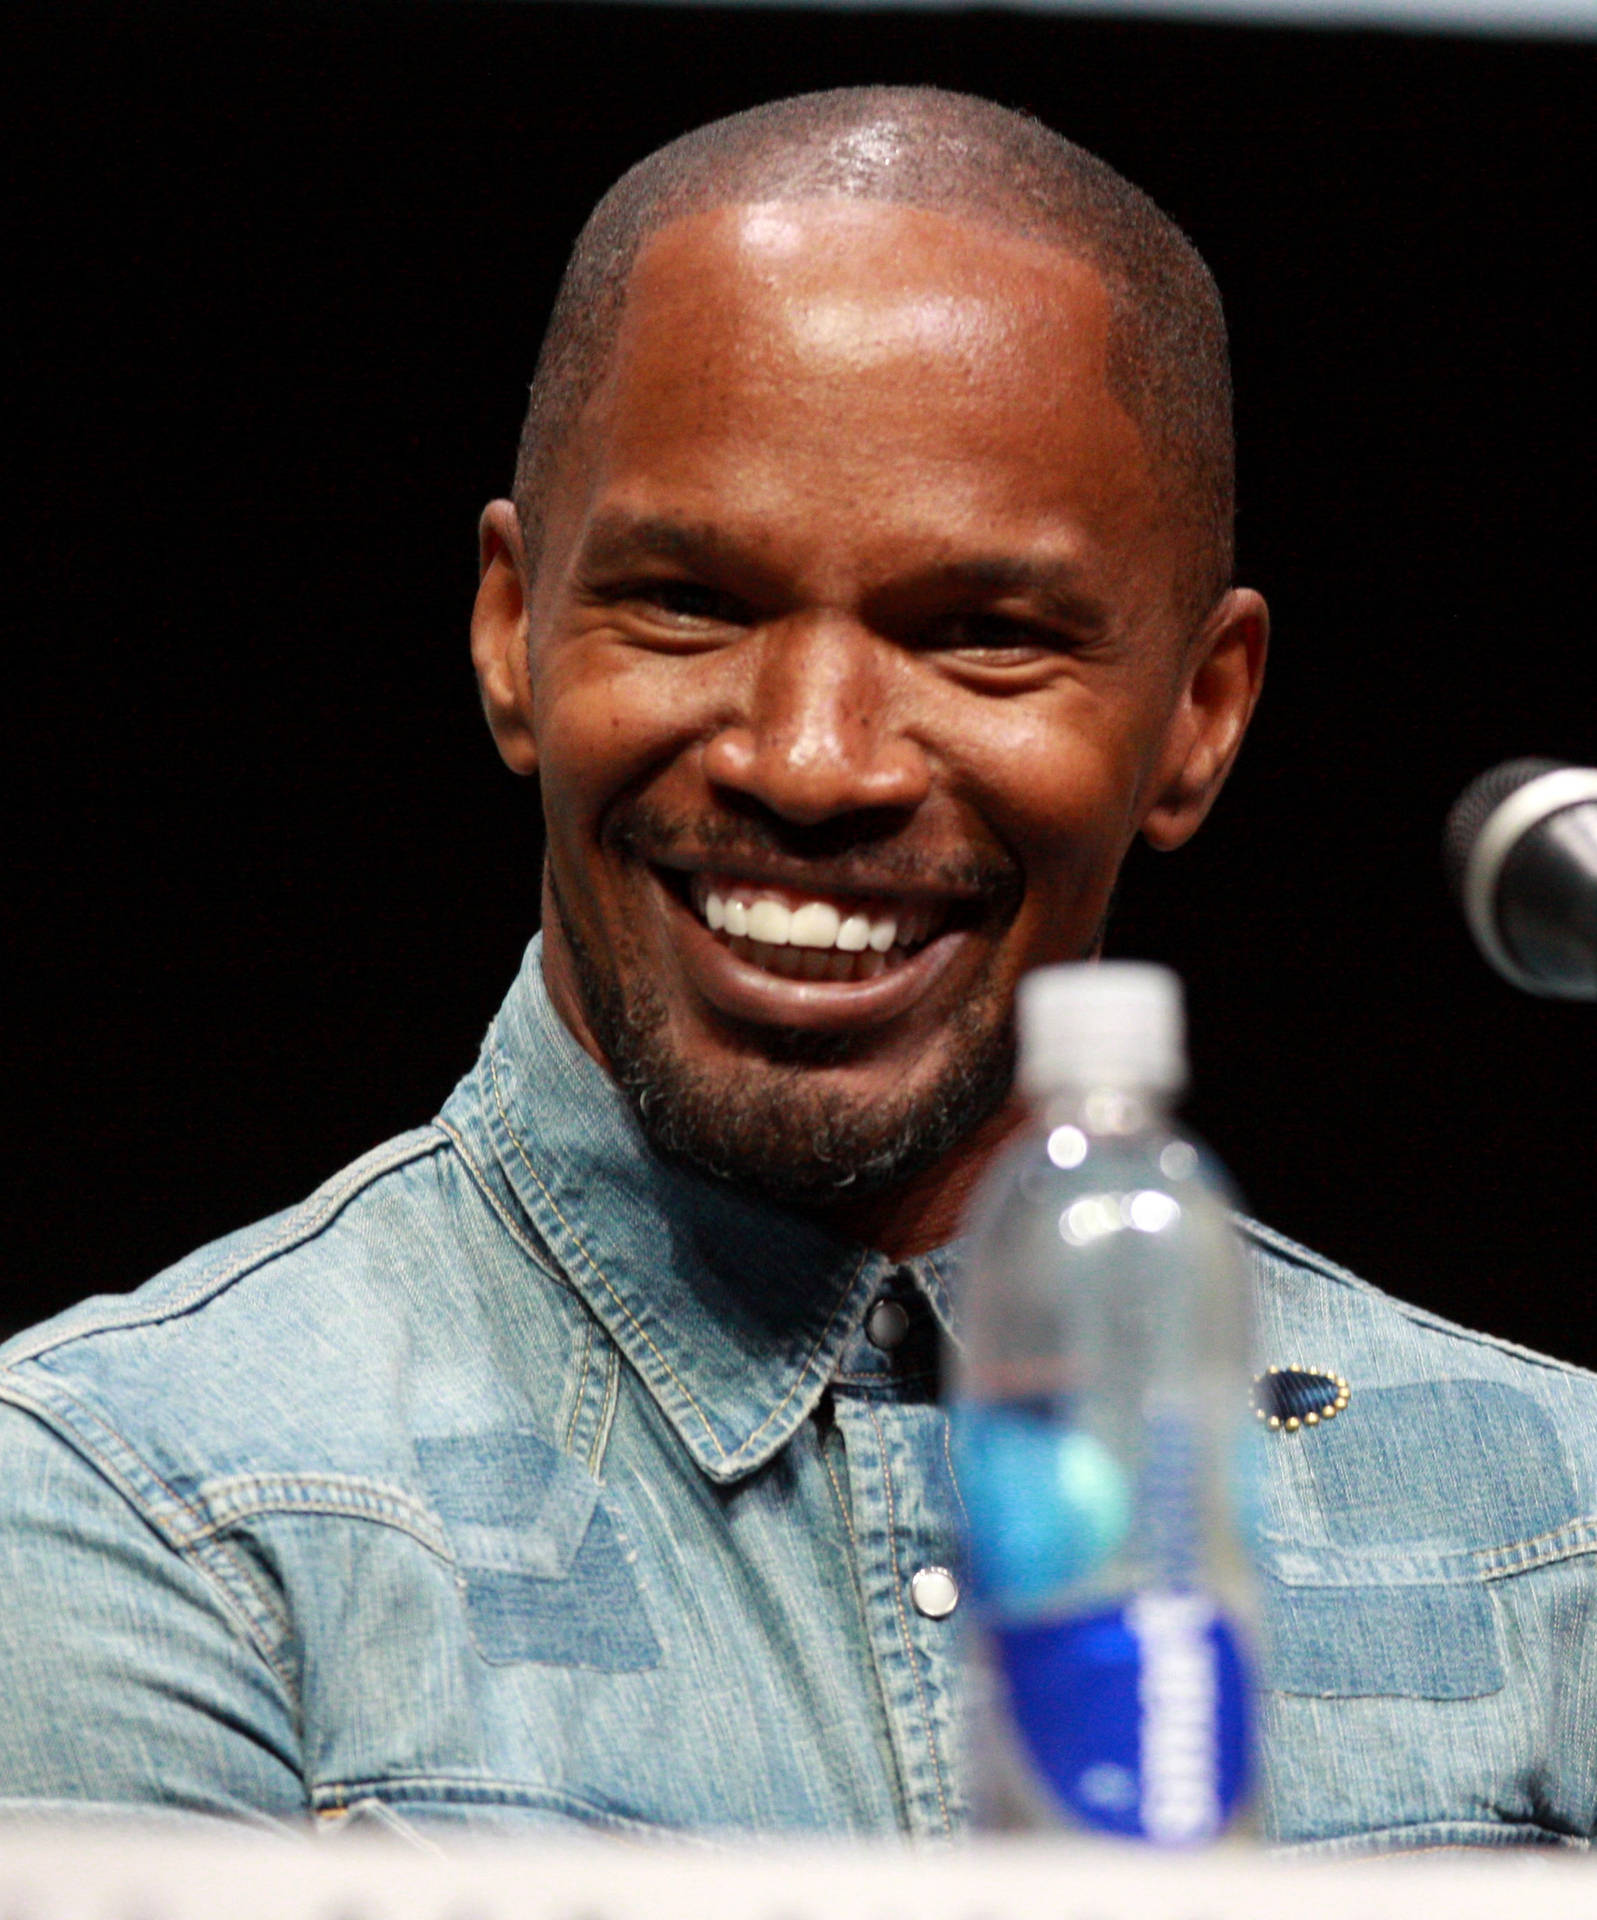 Jamie Foxx grins happily while attending the Golden Globe Awards. Wallpaper